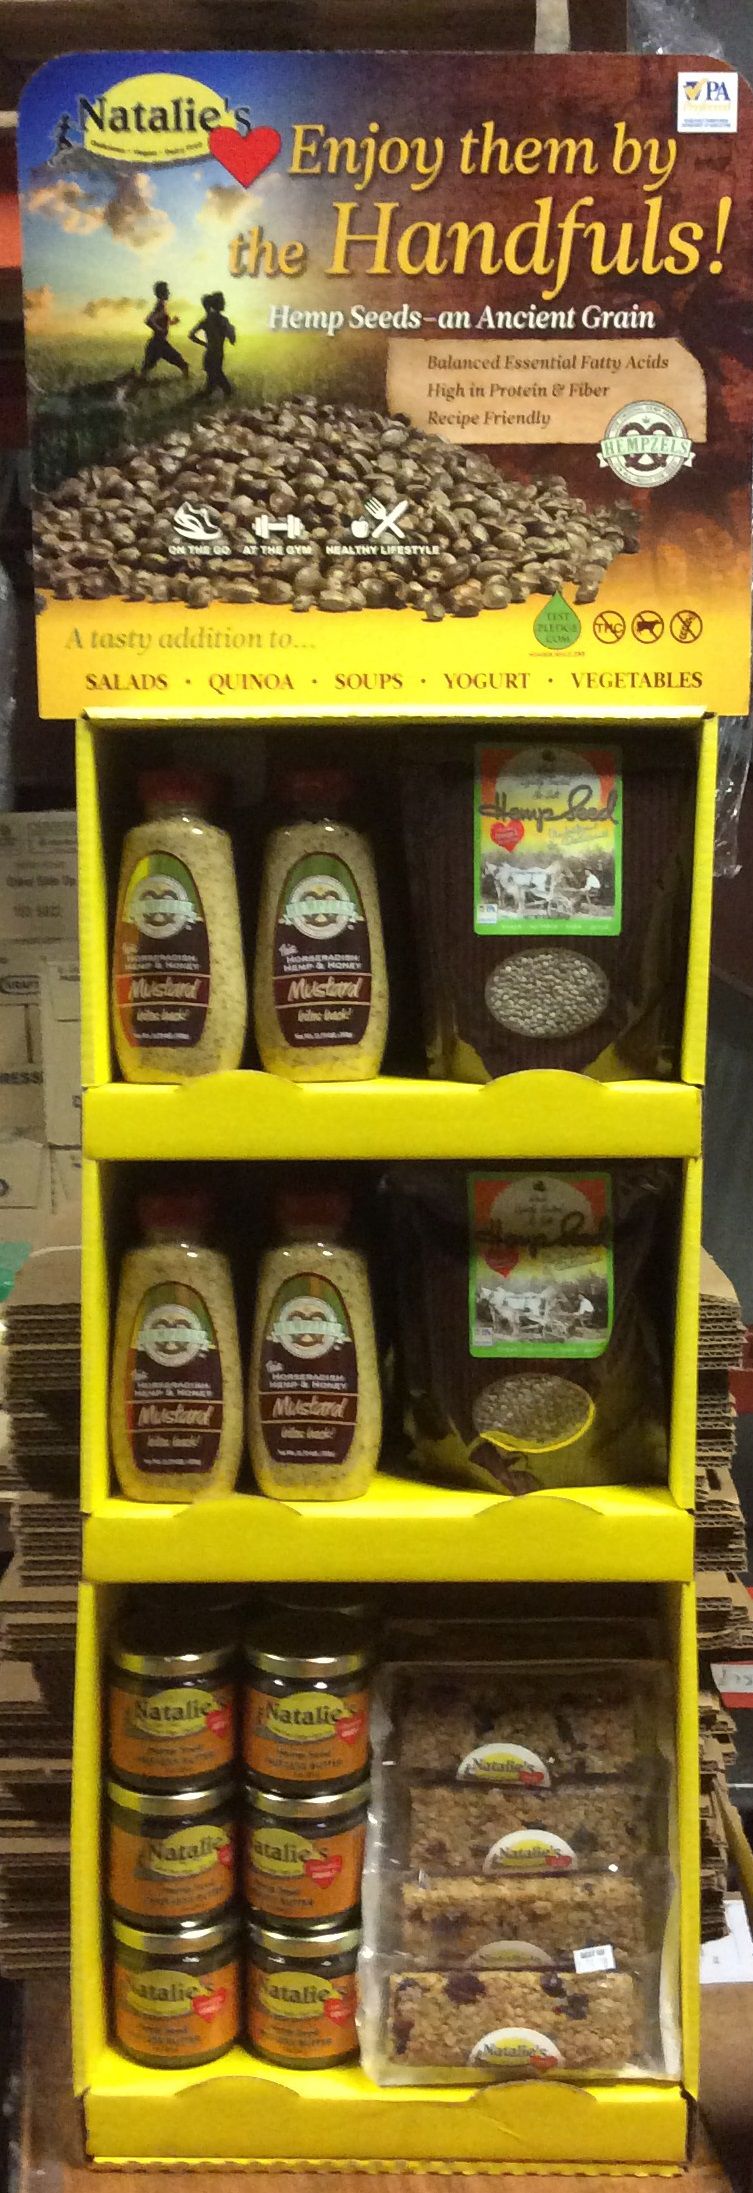 Bright yellow display with multi-color display, on shelves are mustard, hemp seed, butter and granola bars.